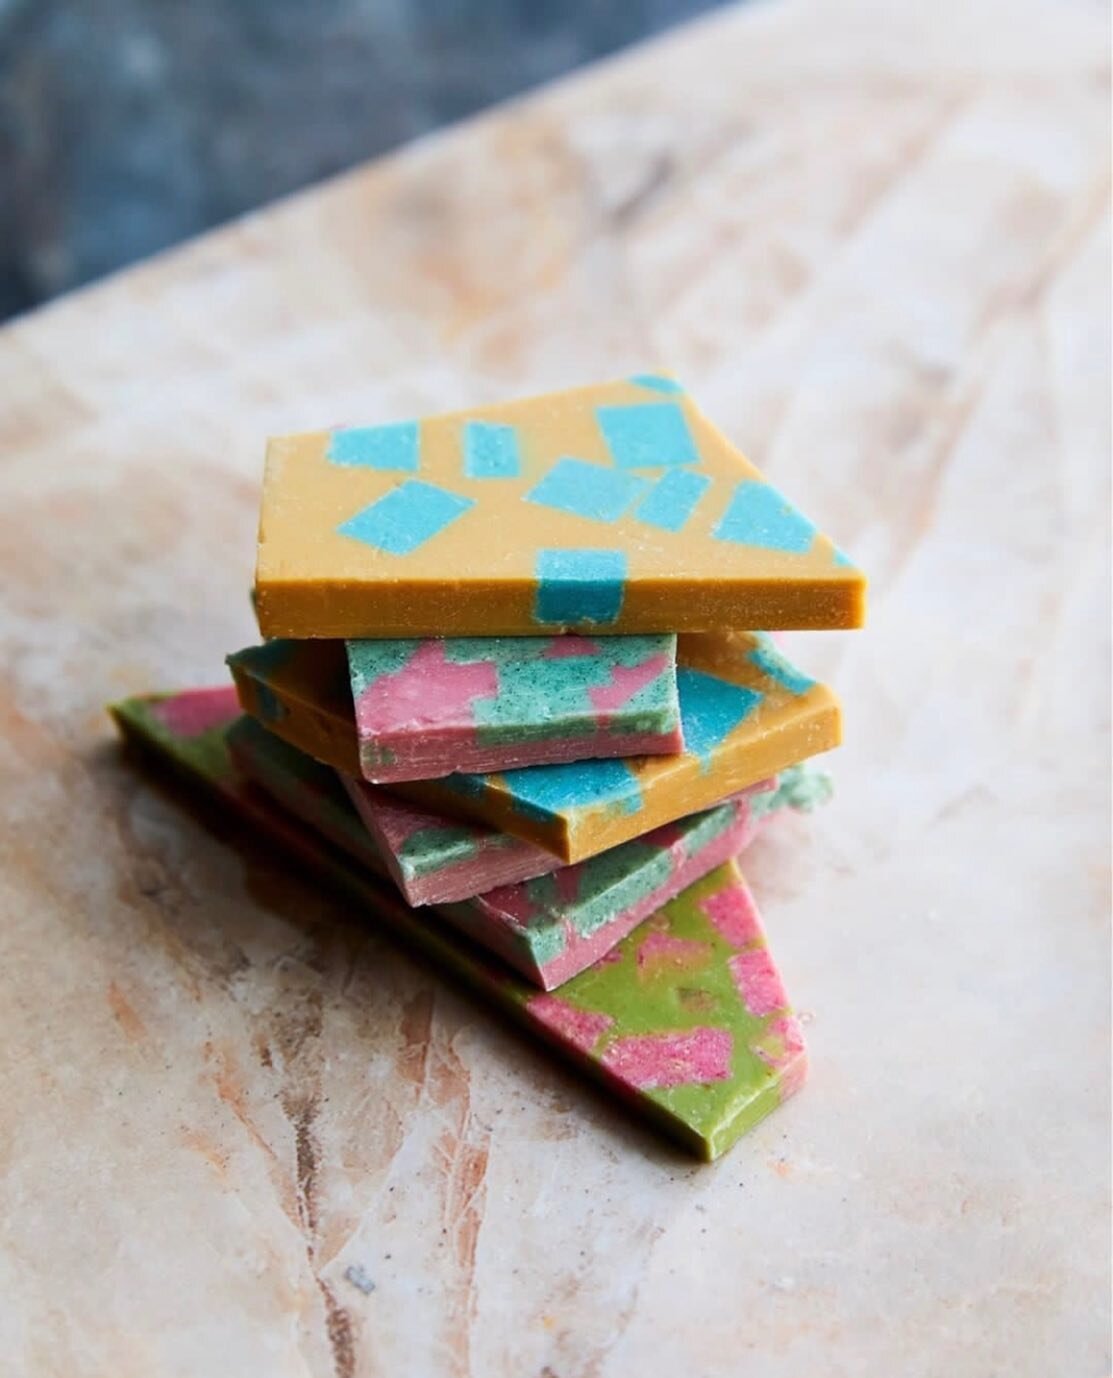 TODAY IS WORLD CHOCOLATE DAY🍫
Come celebrate it with us with @brik.chocolate 

@brik.chocolate , innovators in the world of chocolate,  is crafted to look identical to a range of surfaces - terrazzo, concrete, charred wood and marble. 

Who's celebr